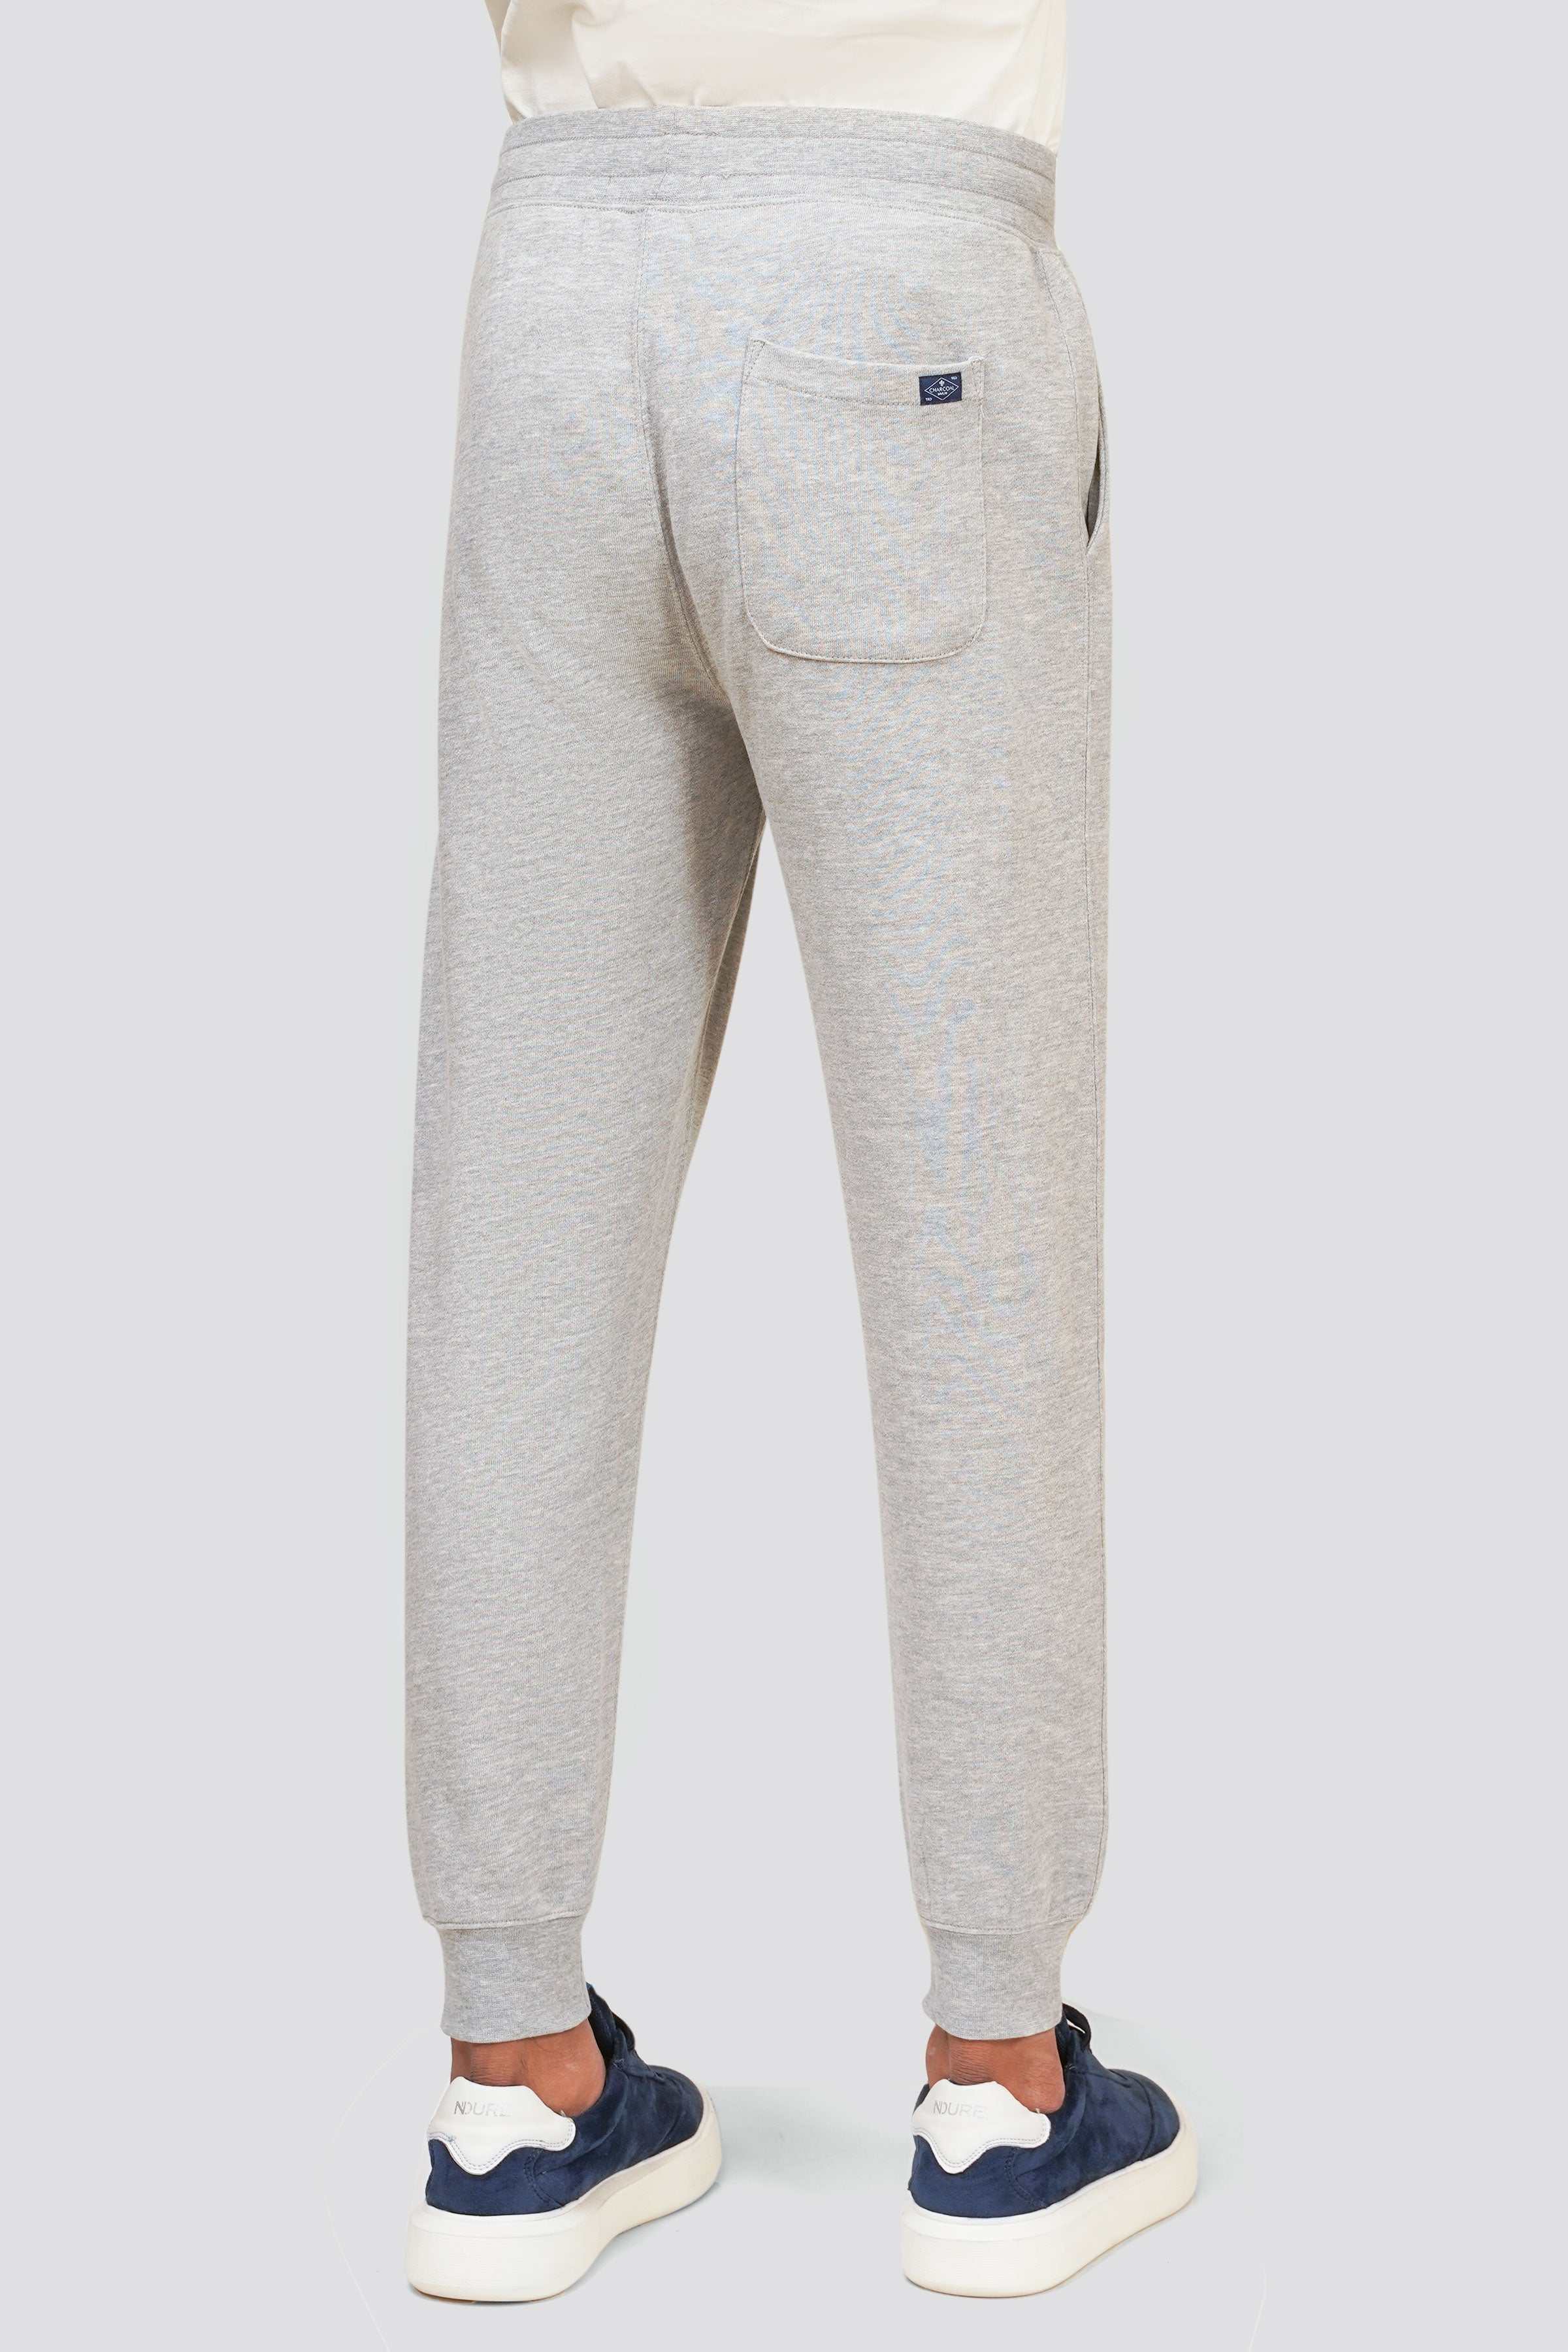 TERRY JOGGER TROUSER GREY MELANGE at Charcoal Clothing